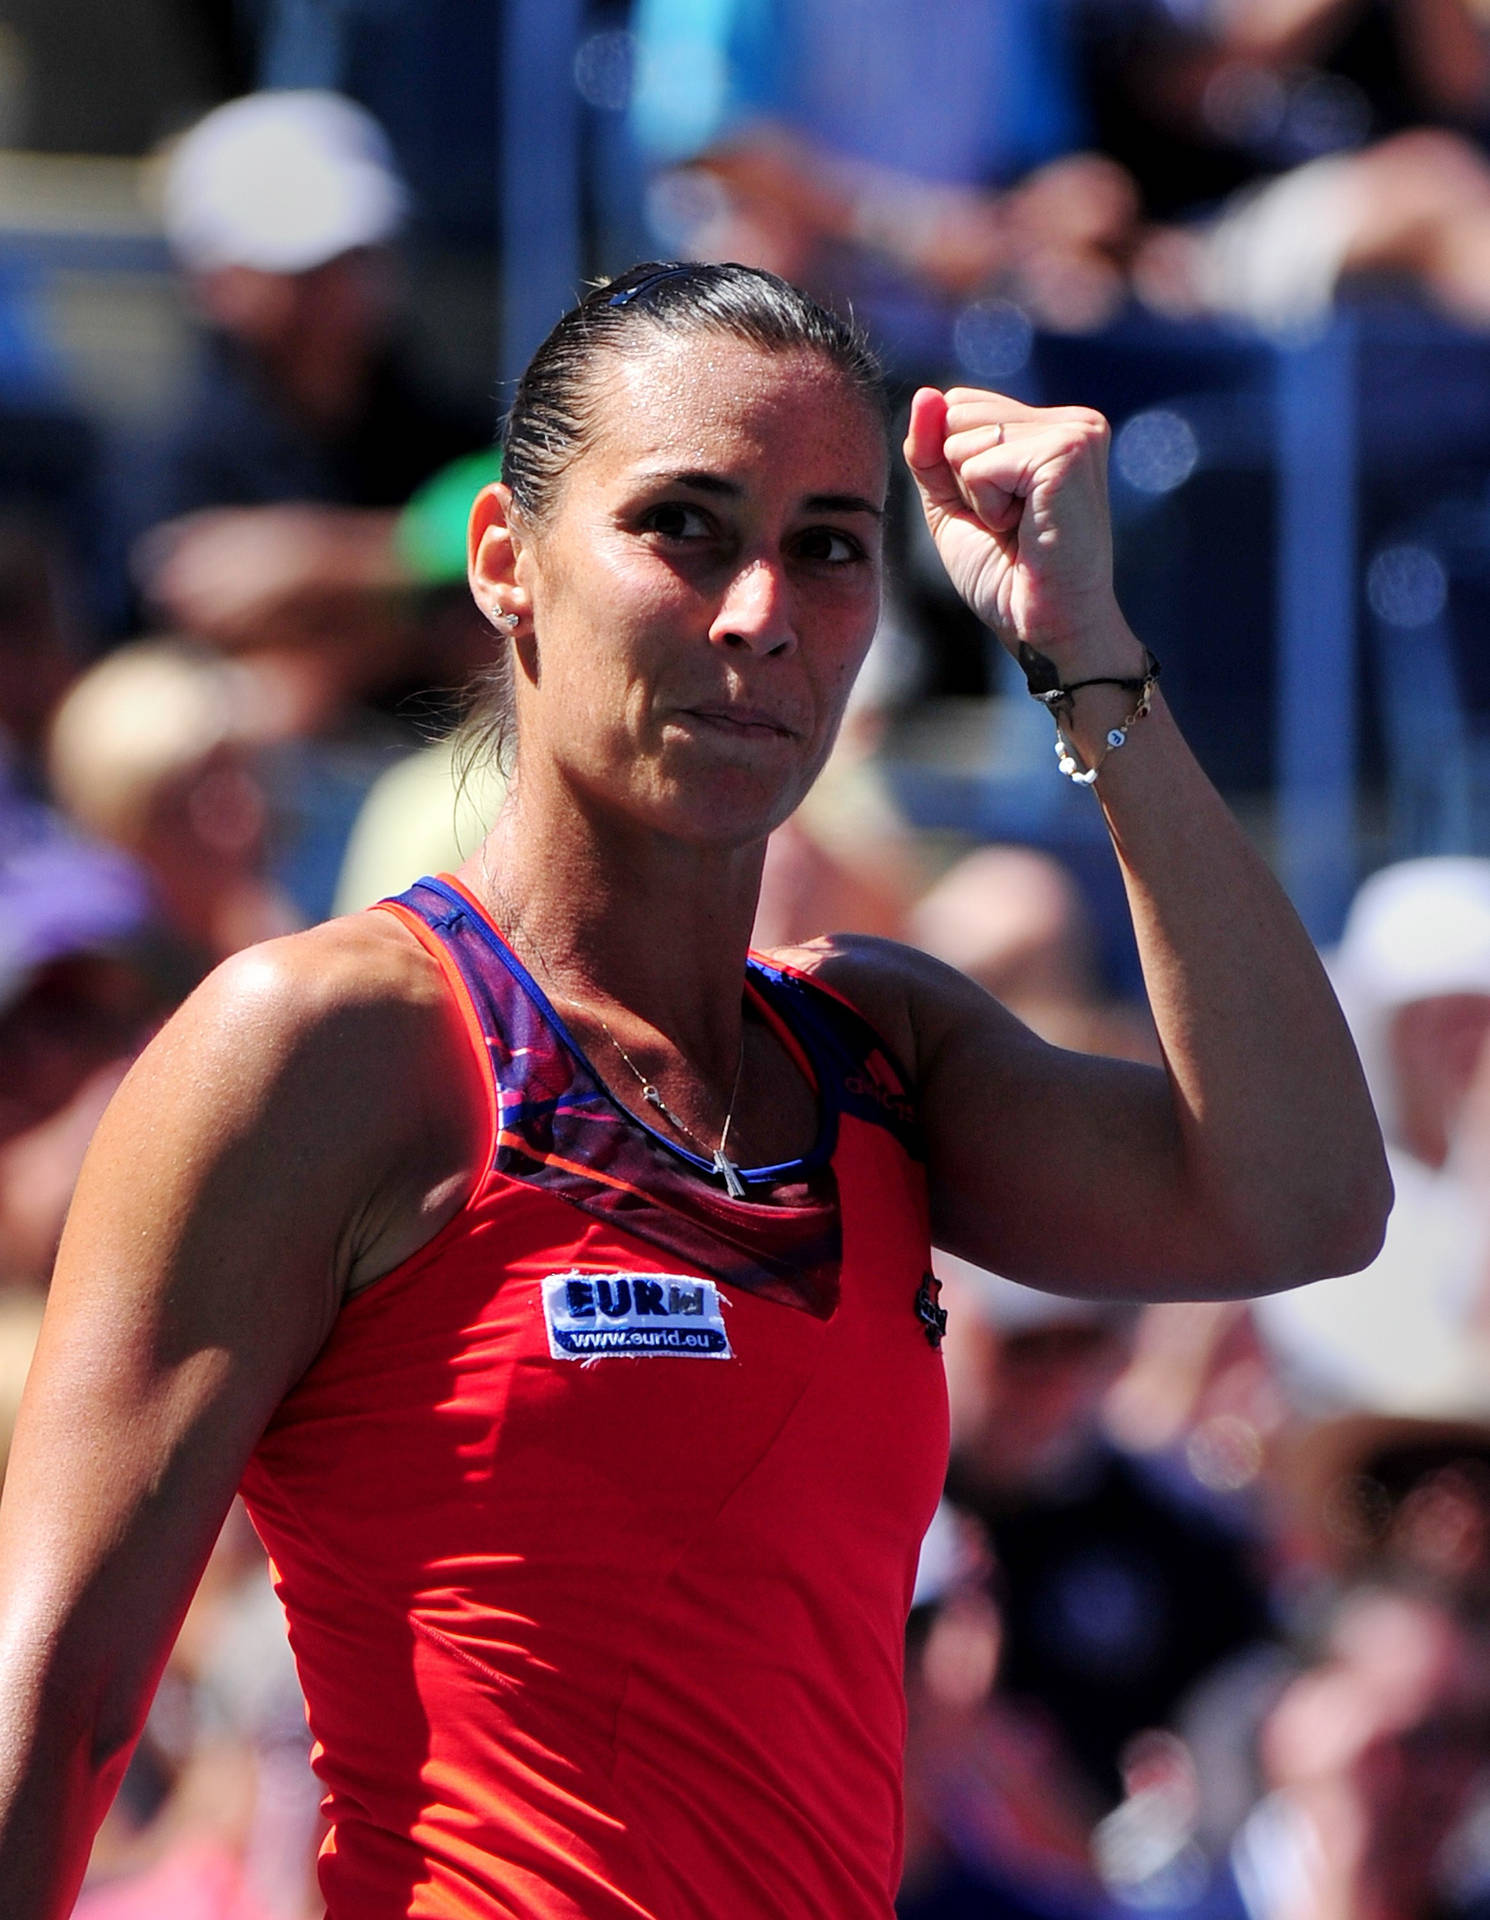 The intense Flavia Pennetta in action Wallpaper